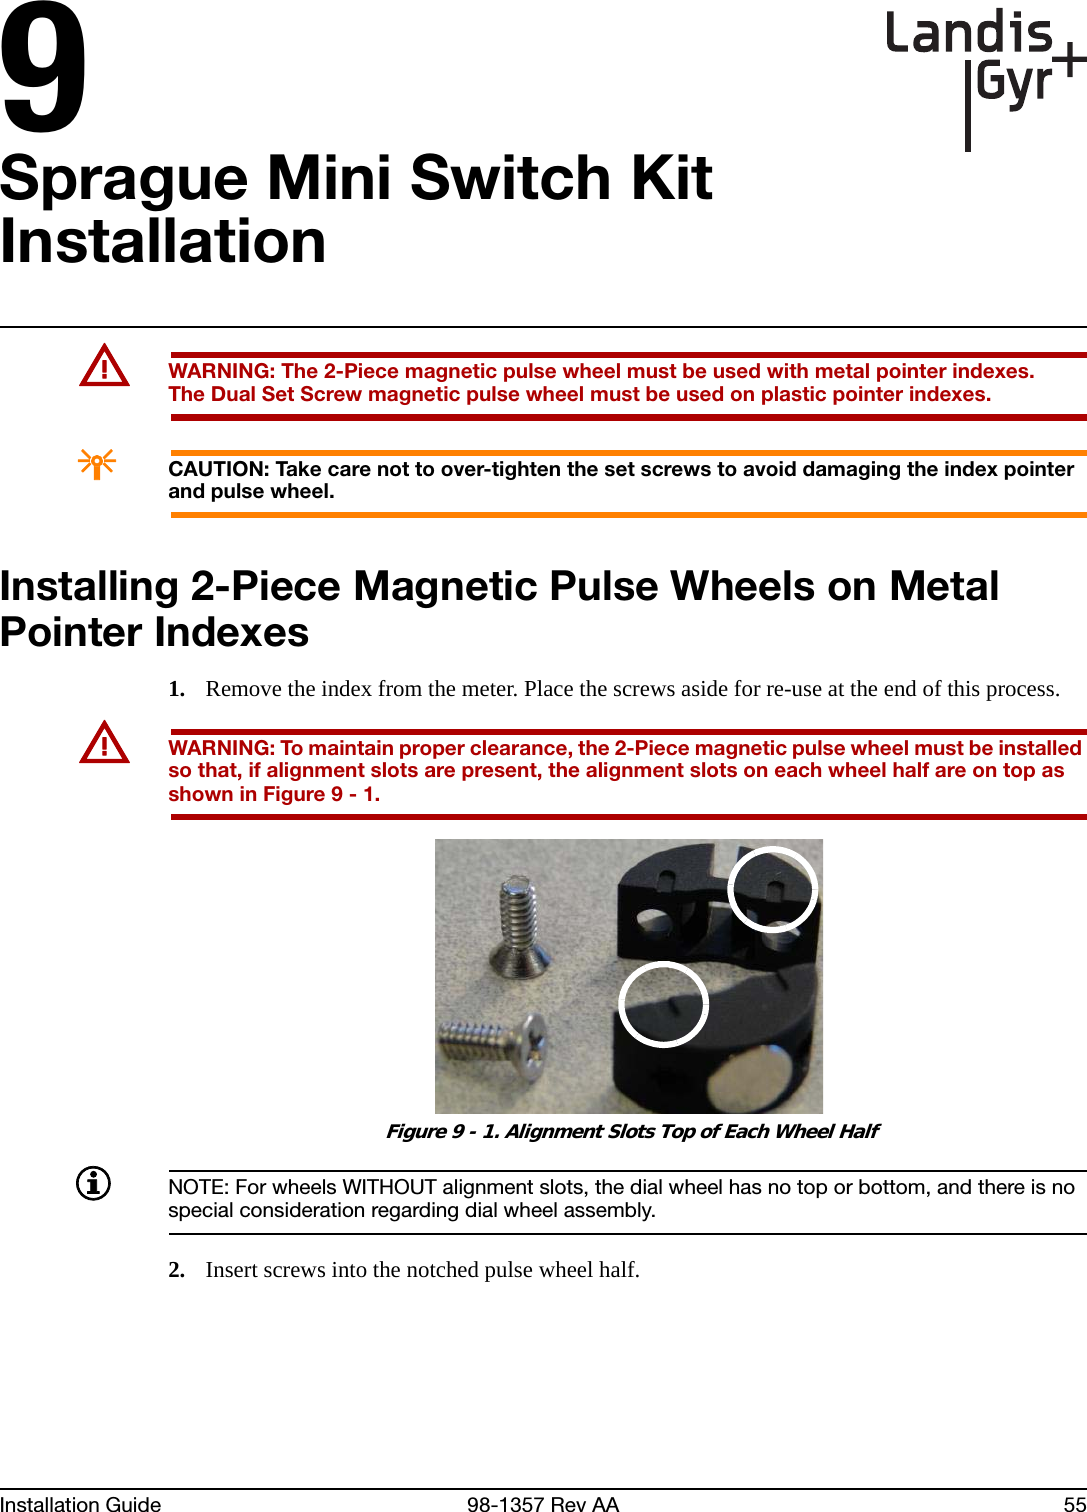 9Installation Guide 98-1357 Rev AA 55Sprague Mini Switch Kit InstallationUWARNING: The 2-Piece magnetic pulse wheel must be used with metal pointer indexes.The Dual Set Screw magnetic pulse wheel must be used on plastic pointer indexes.ACAUTION: Take care not to over-tighten the set screws to avoid damaging the index pointer and pulse wheel.Installing 2-Piece Magnetic Pulse Wheels on Metal Pointer Indexes1. Remove the index from the meter. Place the screws aside for re-use at the end of this process.UWARNING: To maintain proper clearance, the 2-Piece magnetic pulse wheel must be installed so that, if alignment slots are present, the alignment slots on each wheel half are on top as shown in Figure 9 - 1. Figure 9 - 1. Alignment Slots Top of Each Wheel HalfNOTE: For wheels WITHOUT alignment slots, the dial wheel has no top or bottom, and there is no special consideration regarding dial wheel assembly. 2. Insert screws into the notched pulse wheel half.